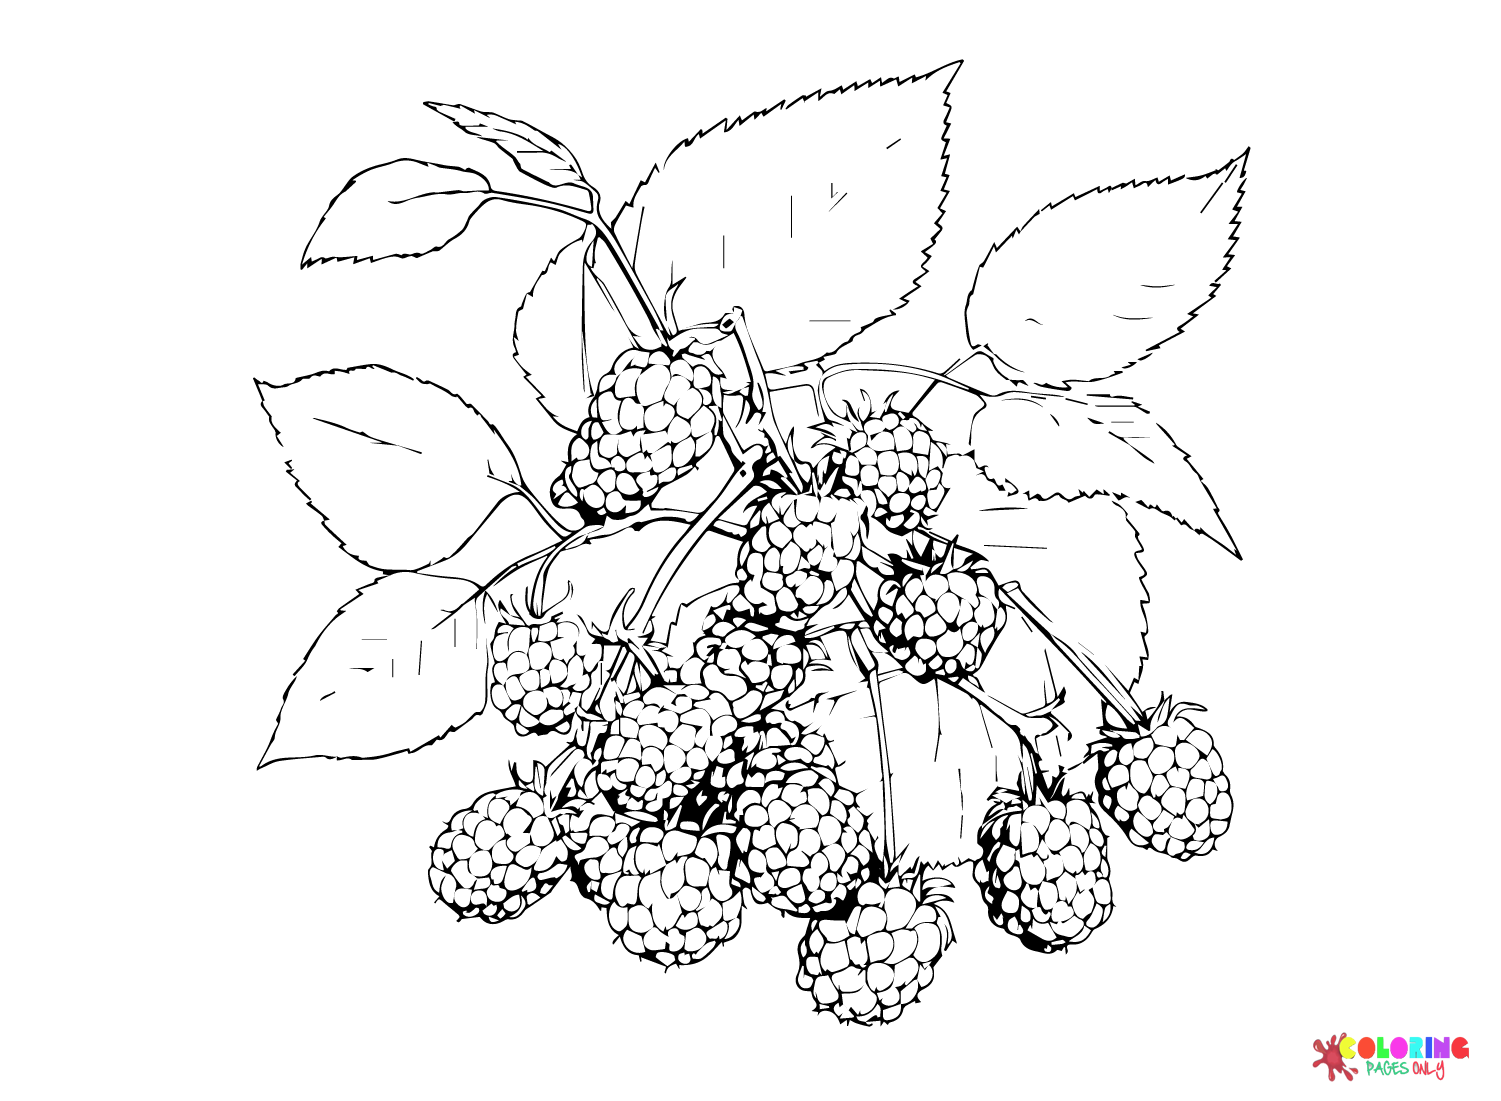 Blackberry color Sheets Coloring Page